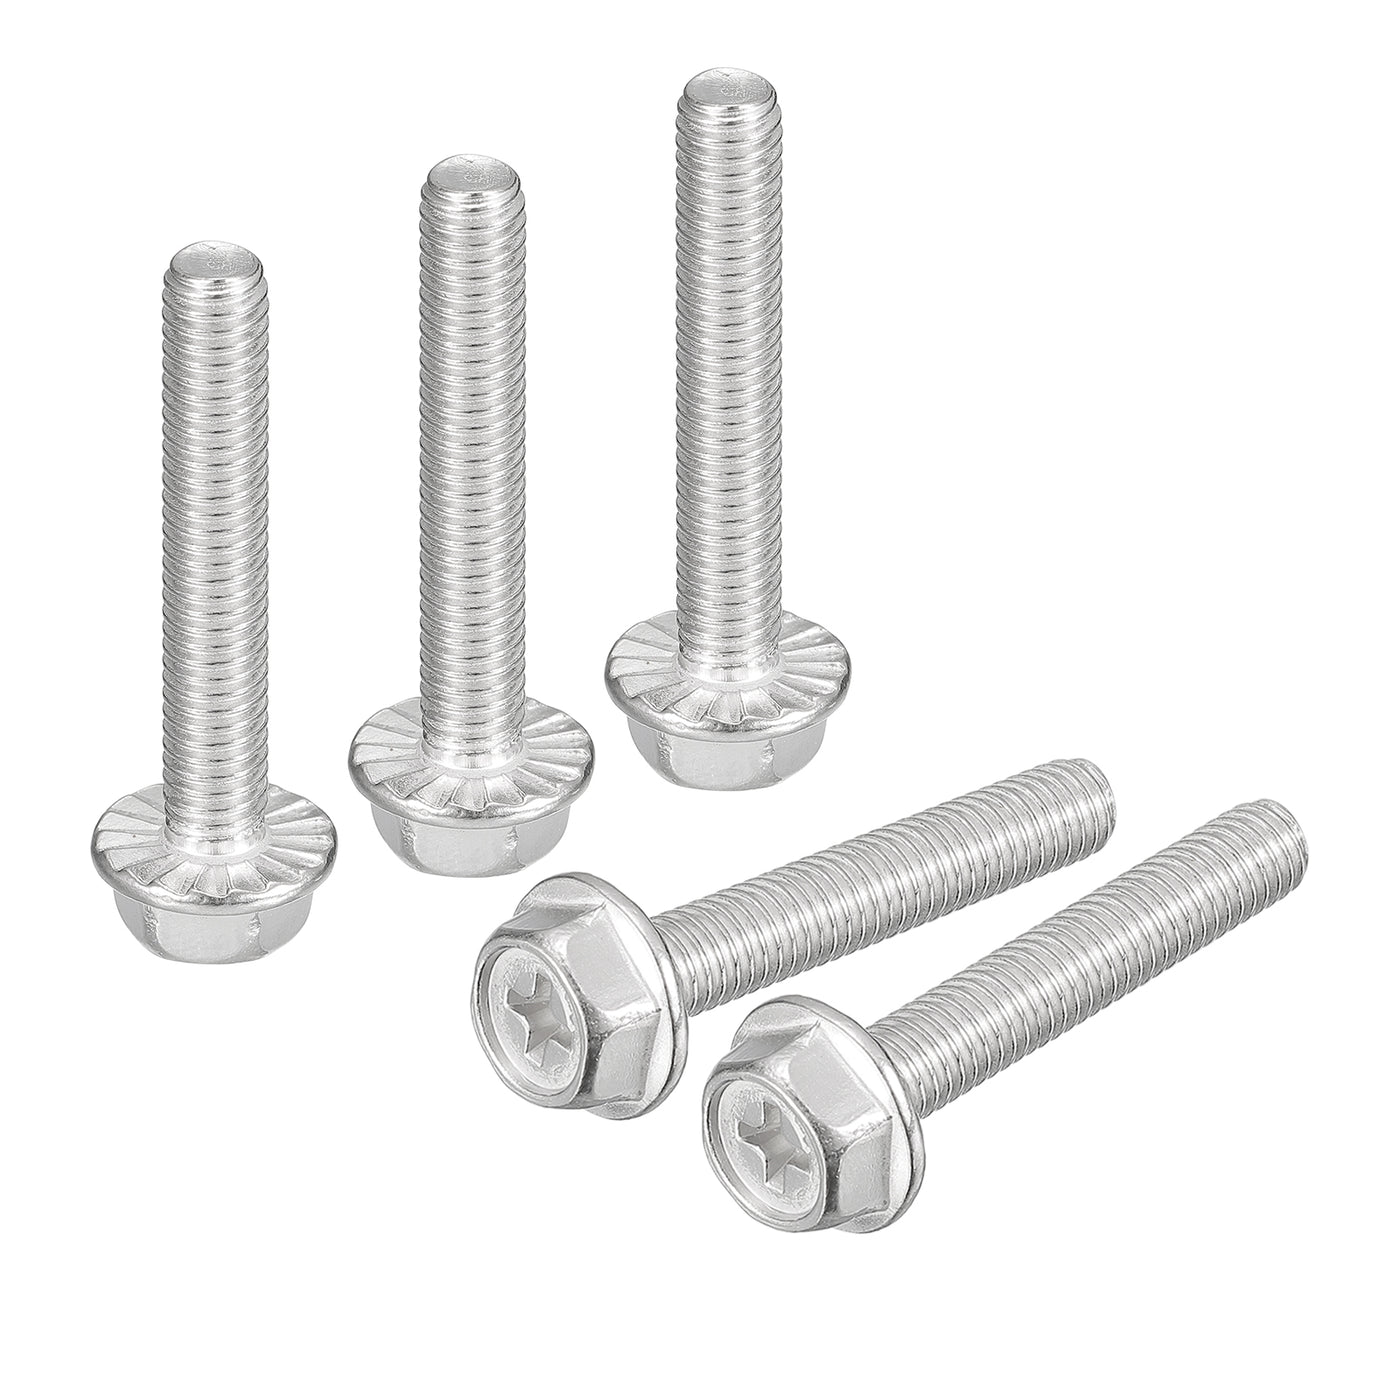 uxcell Uxcell M6x35mm Phillips Hex Head Flange Bolts, 10pcs 304 Stainless Steel Screws